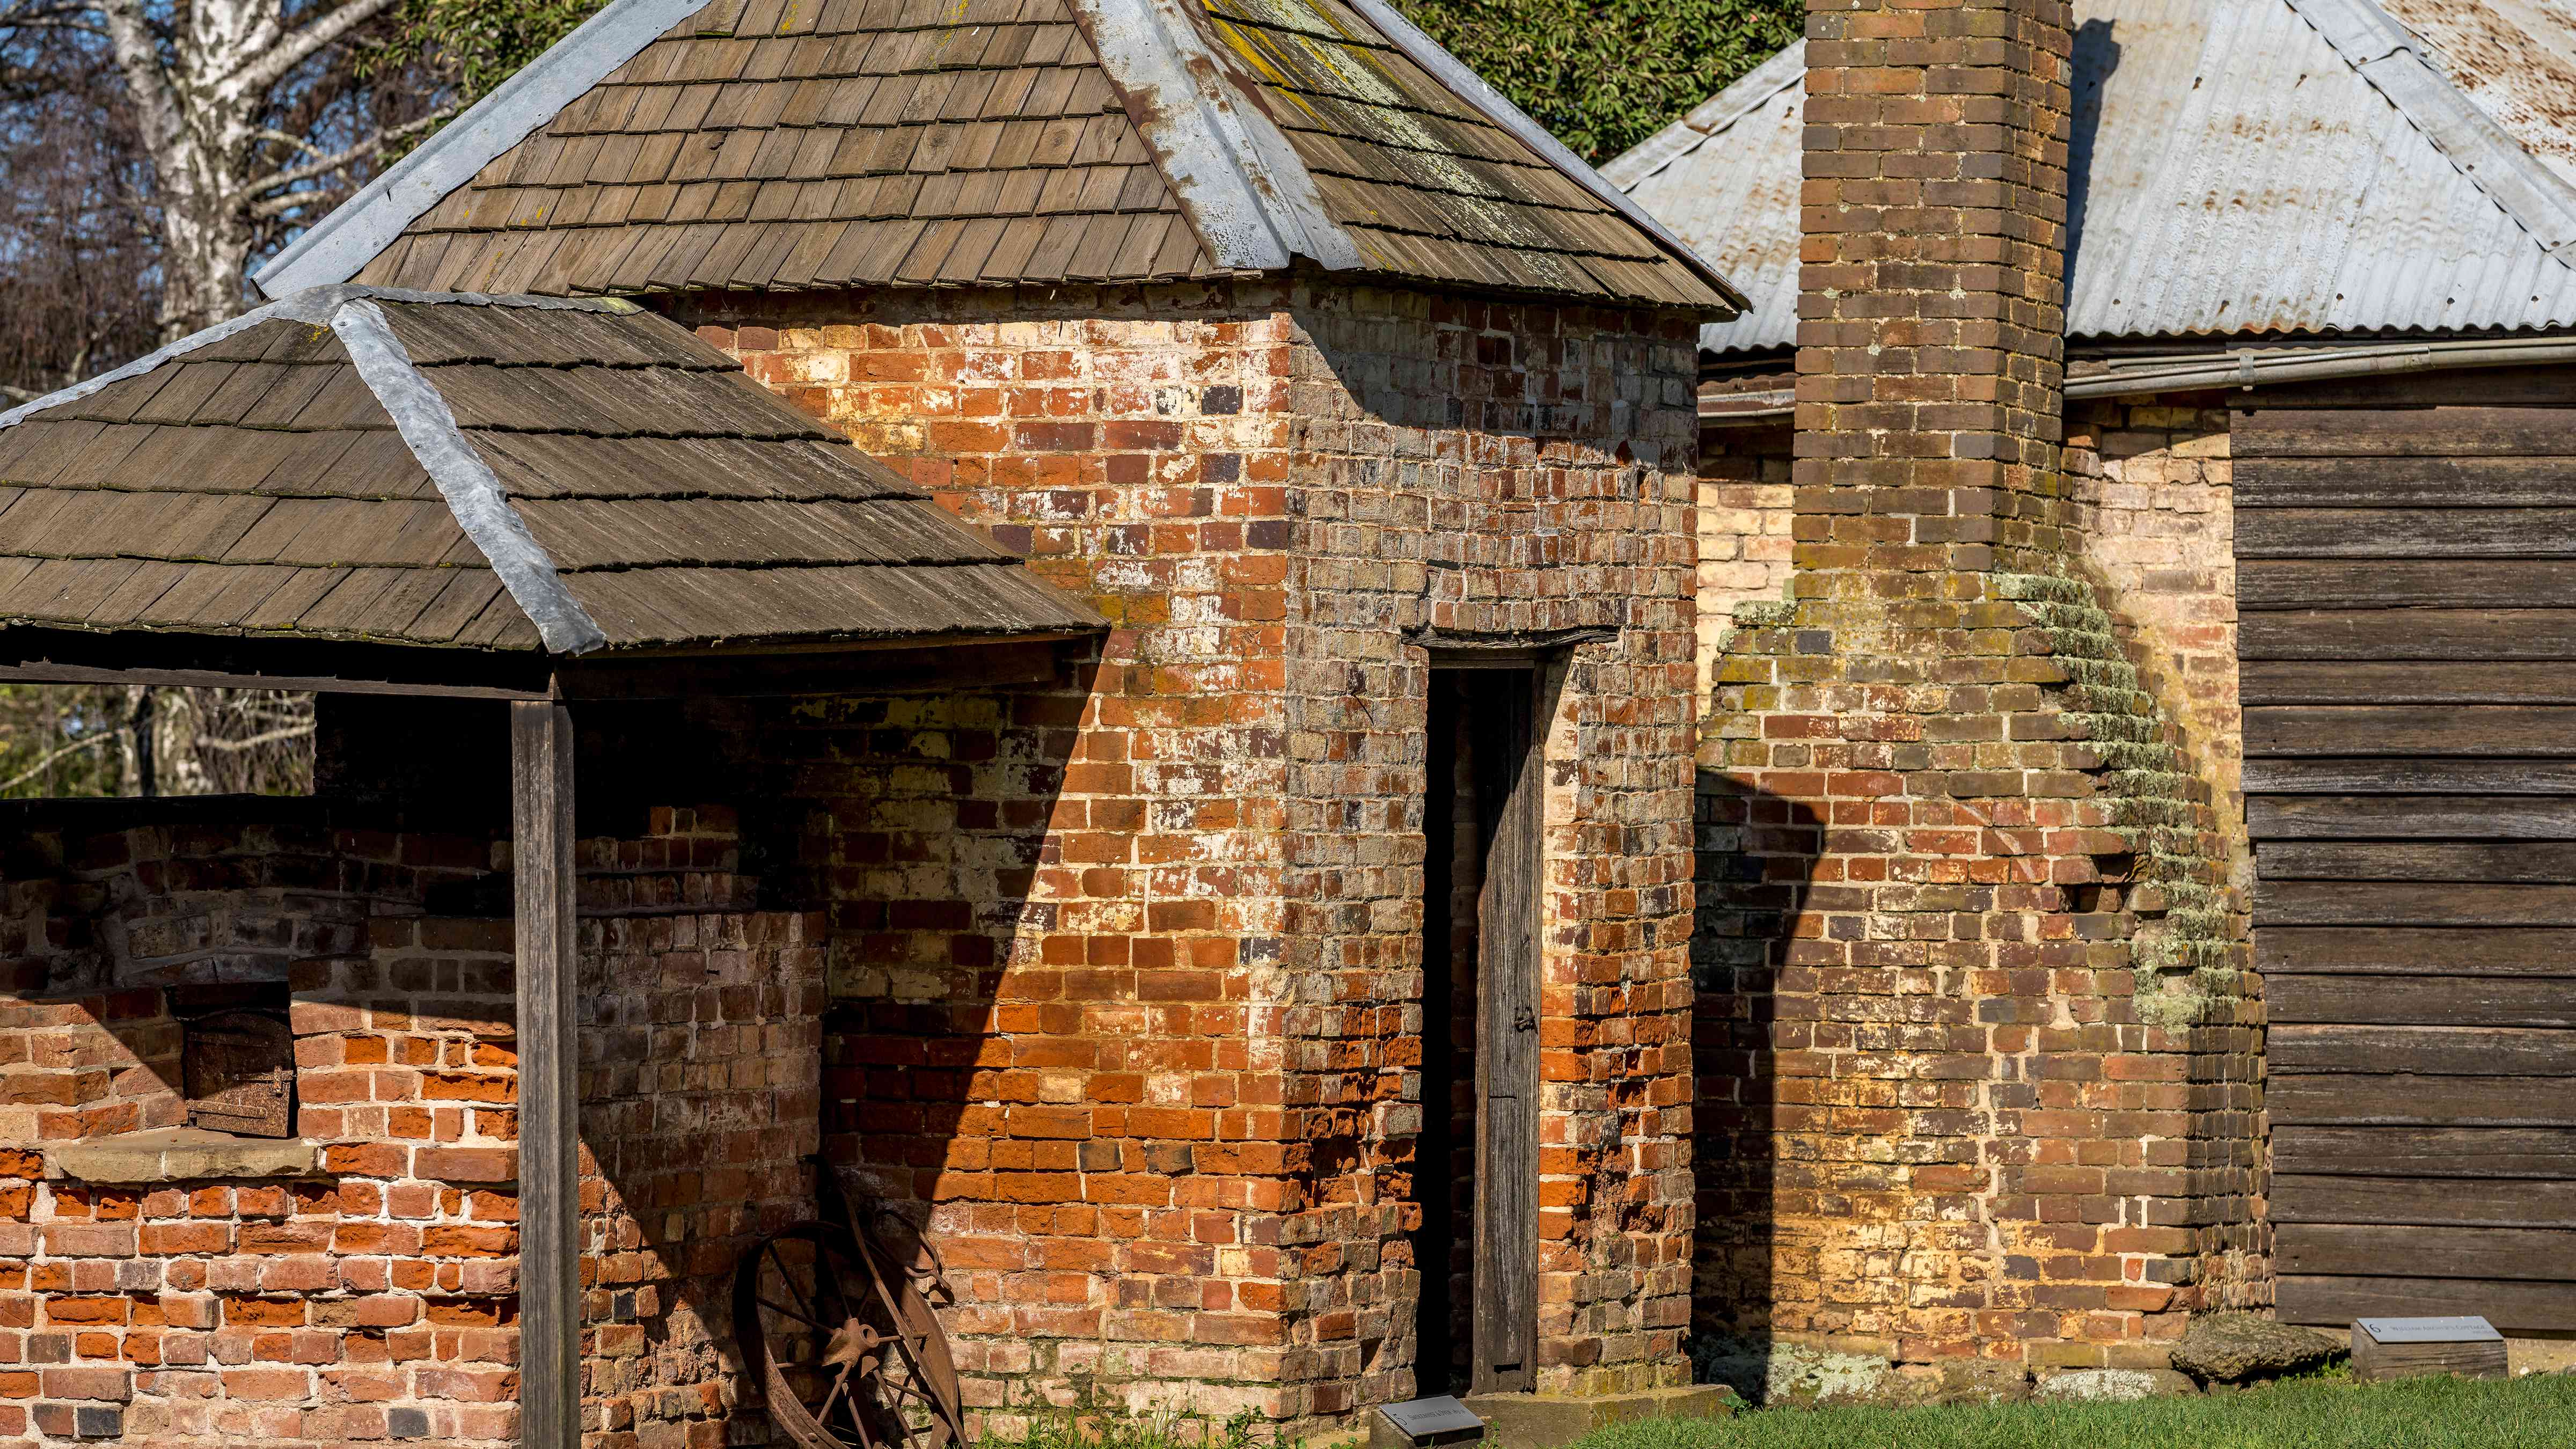 The bread oven and smoke house made from bricks that are multicoloured. The roofs are made from wooden shingles with iron and lead ridge caps . Next door is the side of a cottage with a brick chimney and corrugated iron roof. Photo: Rob Burnett.